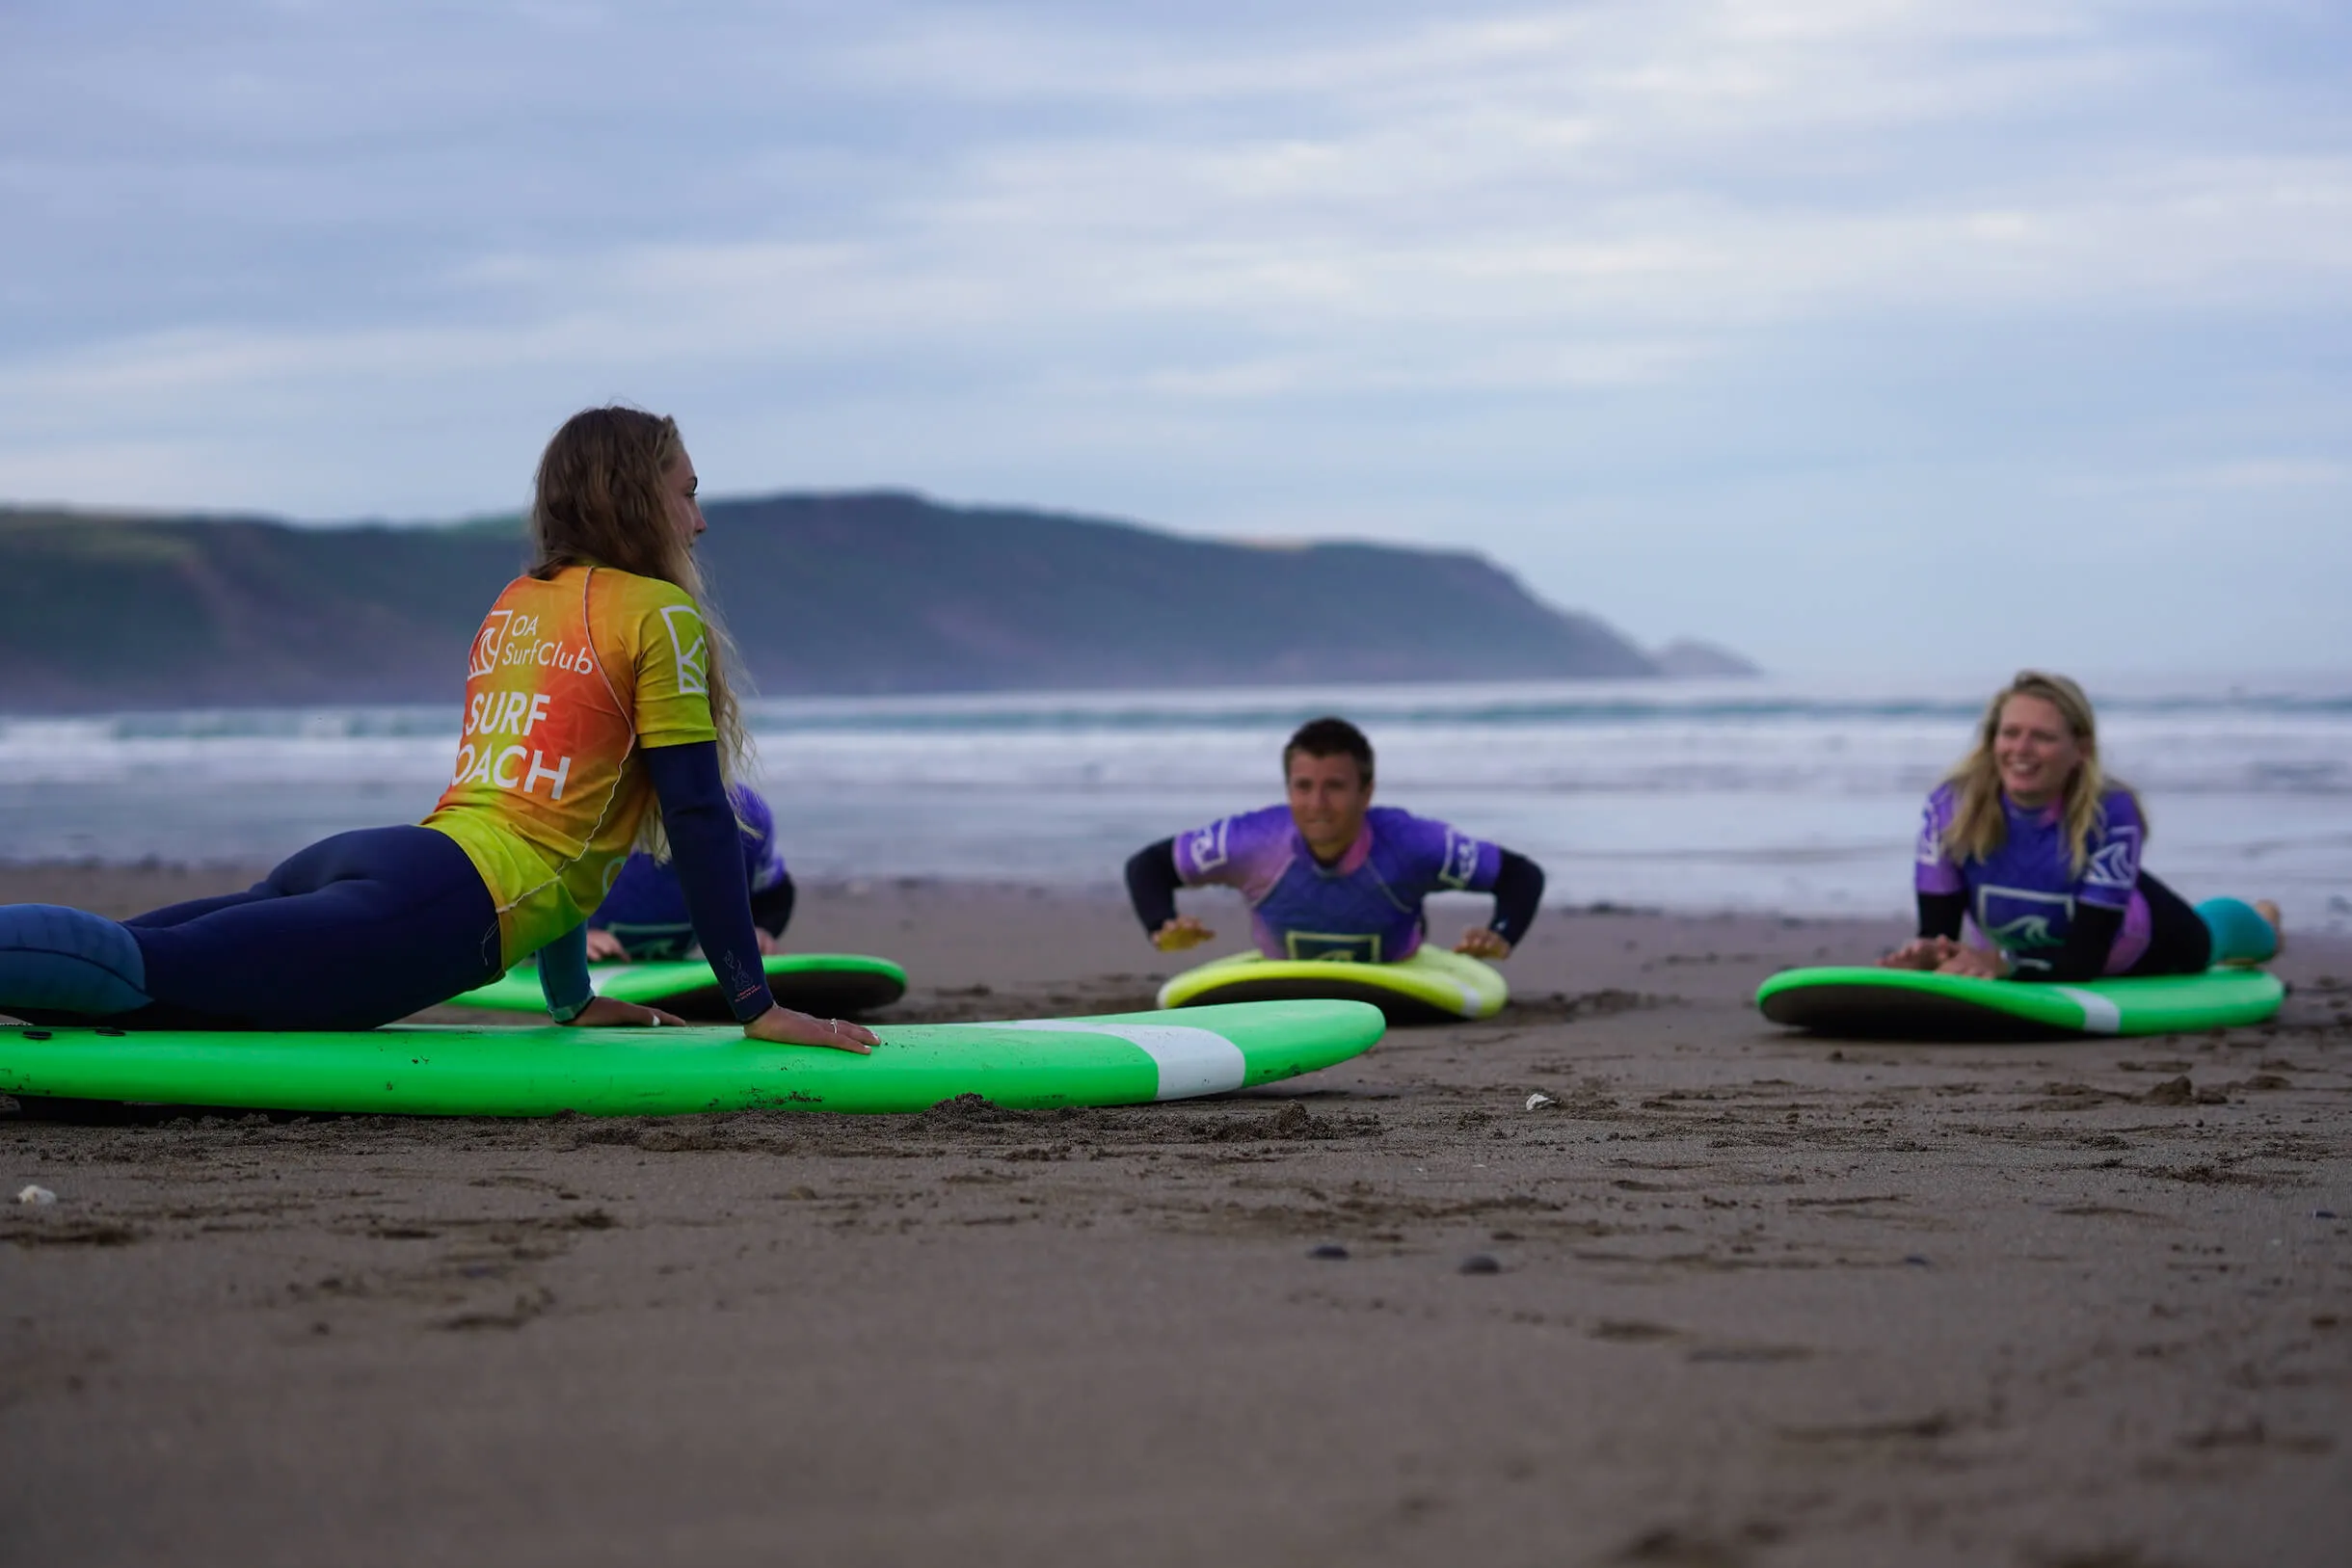 surf lessons in Widemouth Bay, Bude, surf coach coaching on the beach before heading in the water